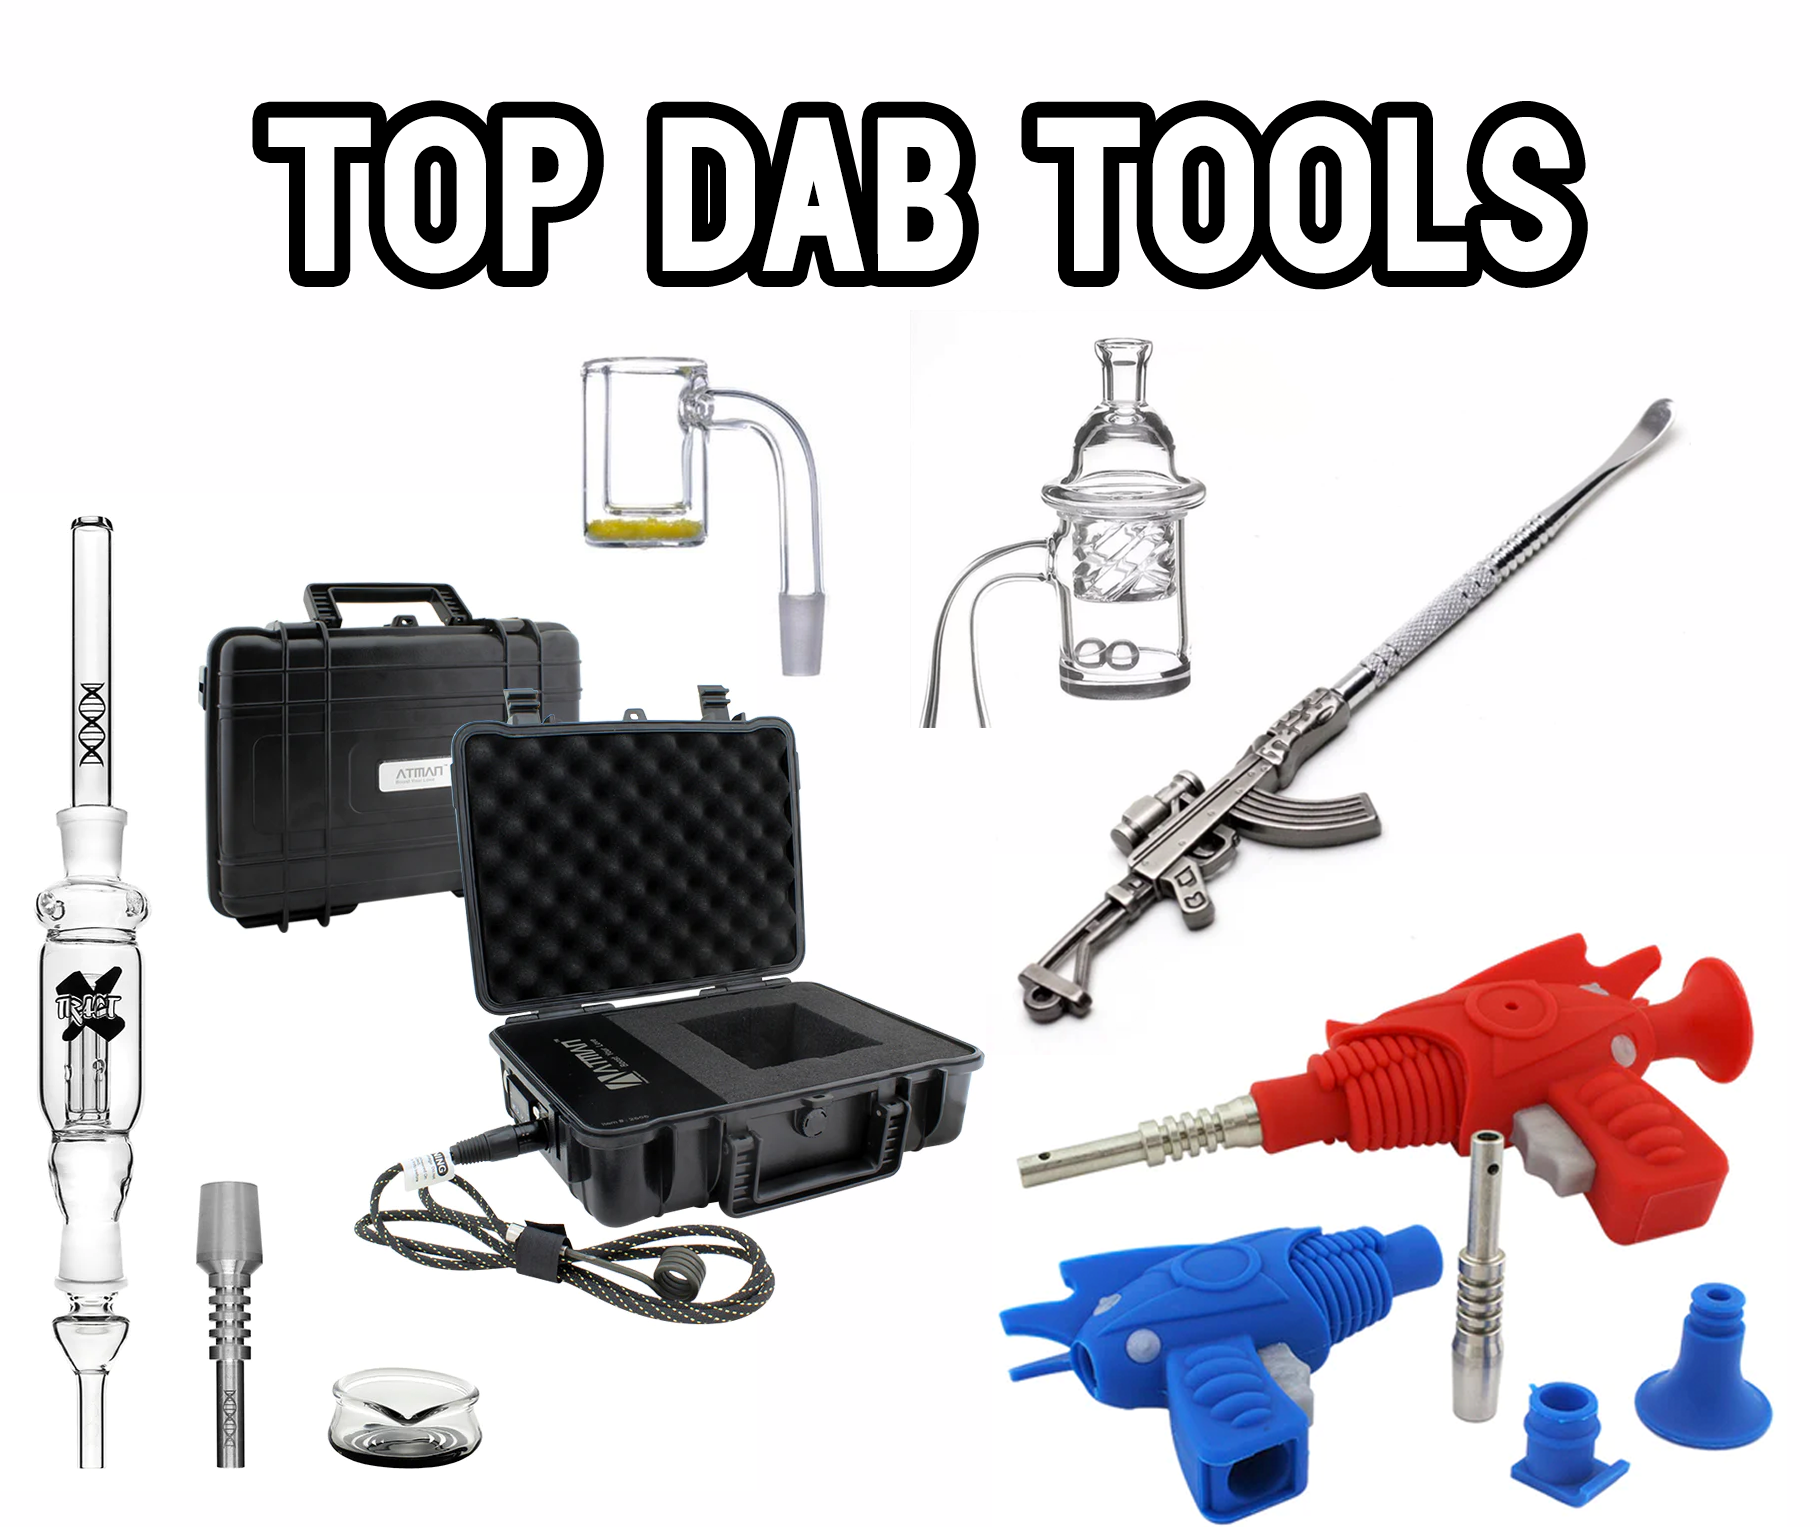 Top 12 Dab Tools: For Efficient Dabbing